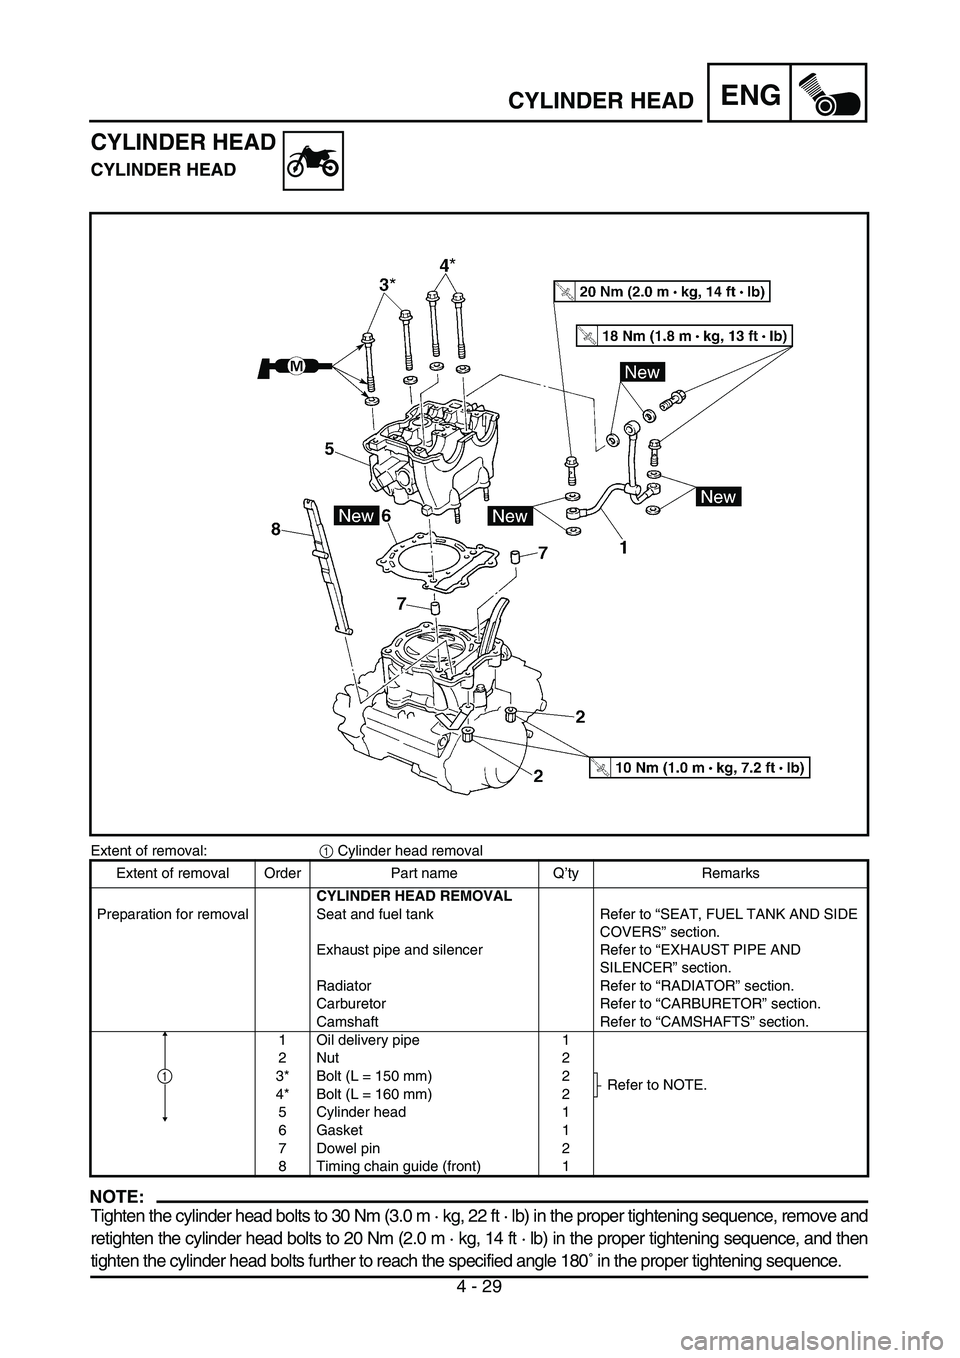 YAMAHA YZ450F 2004  Owners Manual 4 - 29
ENGCYLINDER HEAD
CYLINDER HEAD
CYLINDER HEAD
Extent of removal:1 Cylinder head removal
NOTE:
Tighten the cylinder head bolts to 30 Nm (3.0 m · kg, 22 ft · lb) in the proper tightening sequenc